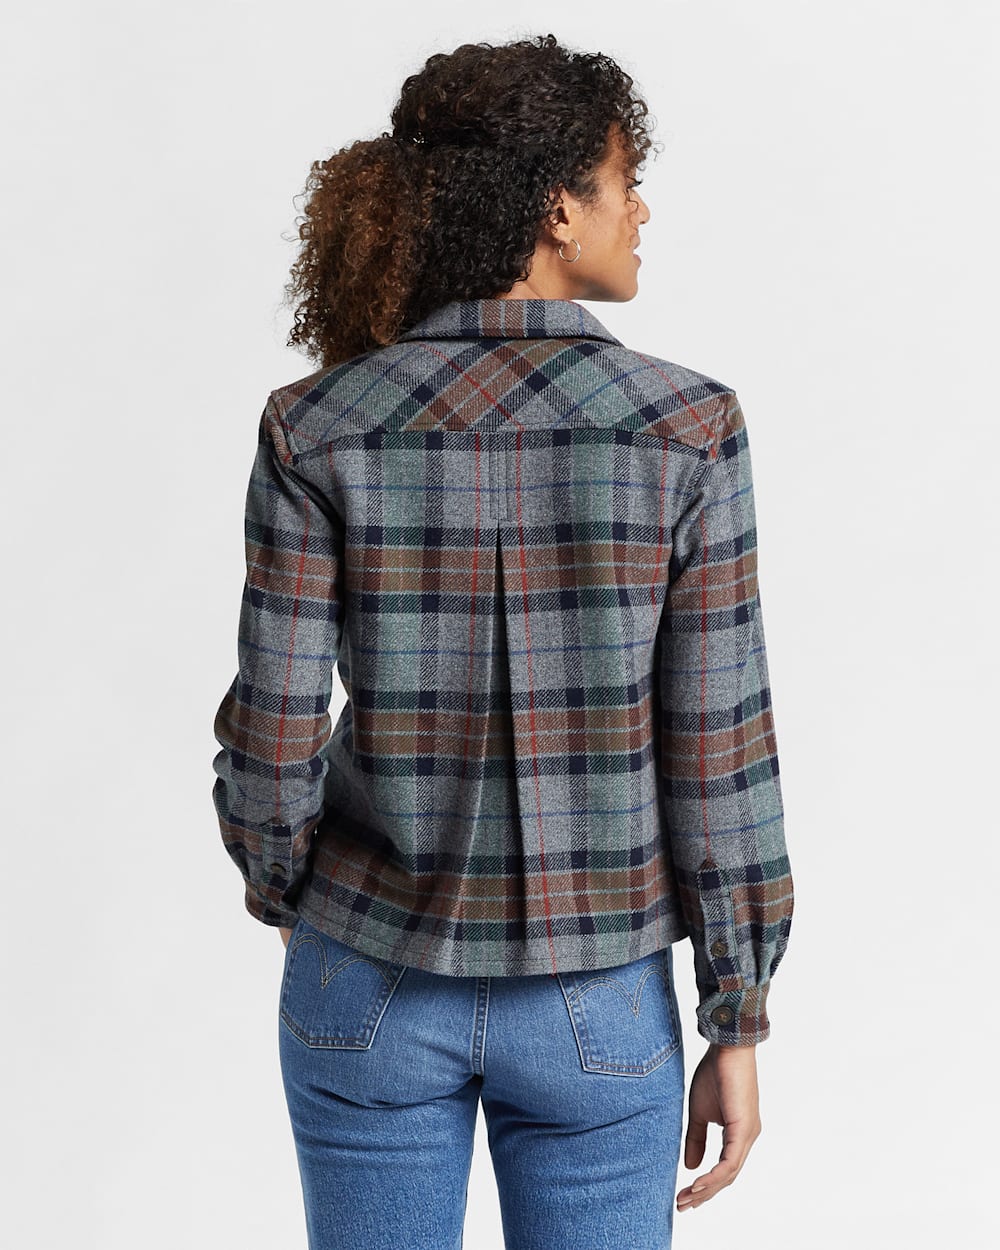 ALTERNATE VIEW OF WOMEN'S ROSLYN WOOL JACKET IN GREY MIX PLAID image number 2